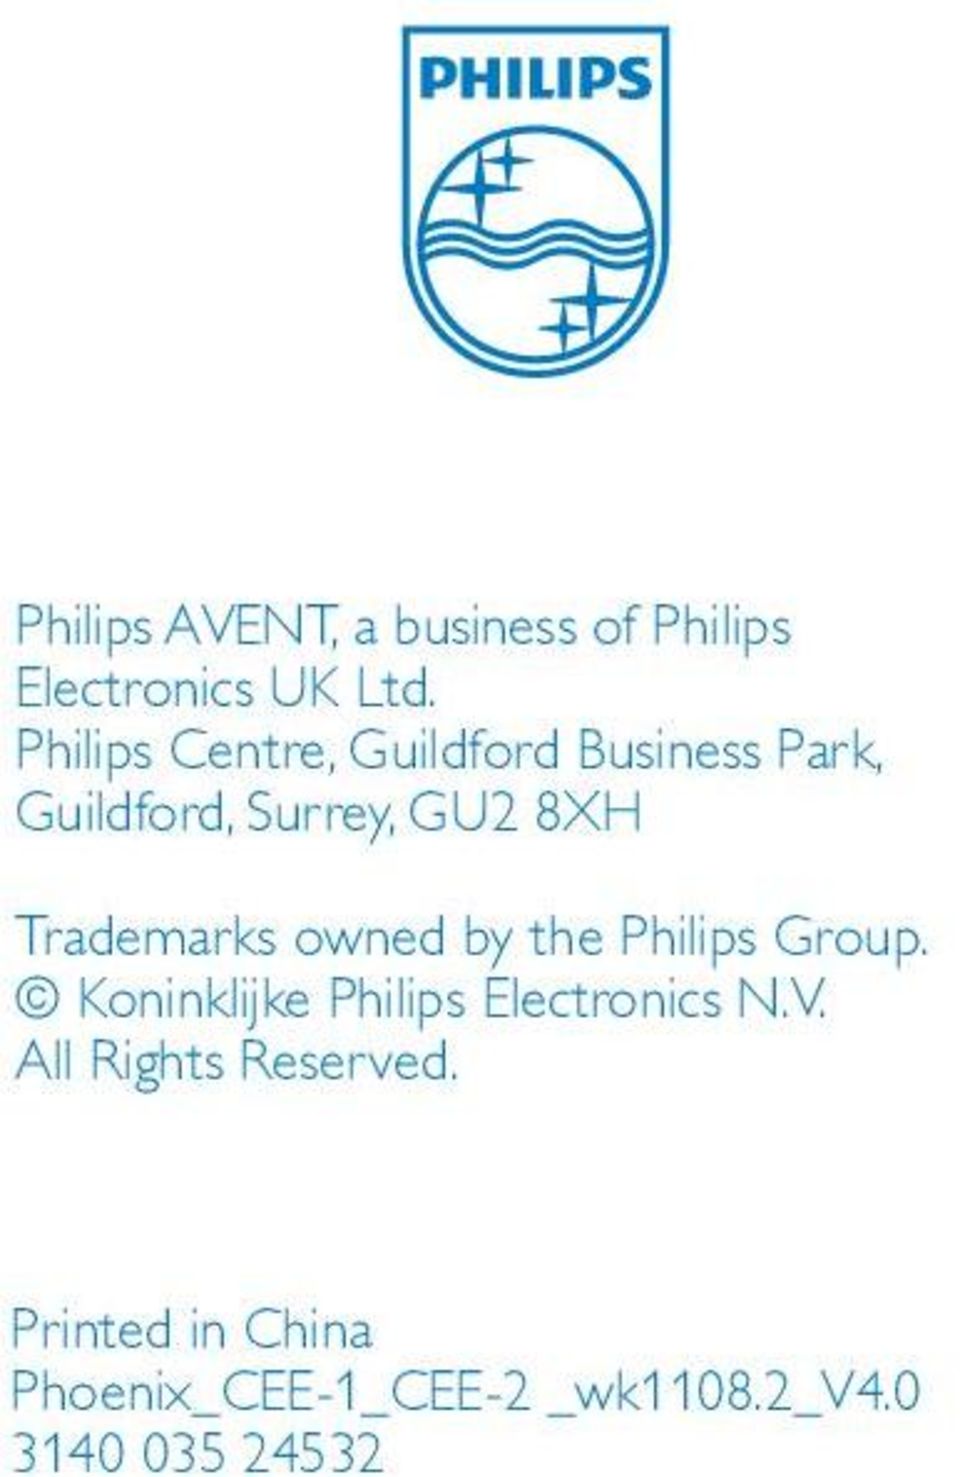 Trademarks owned by the Philips Group.